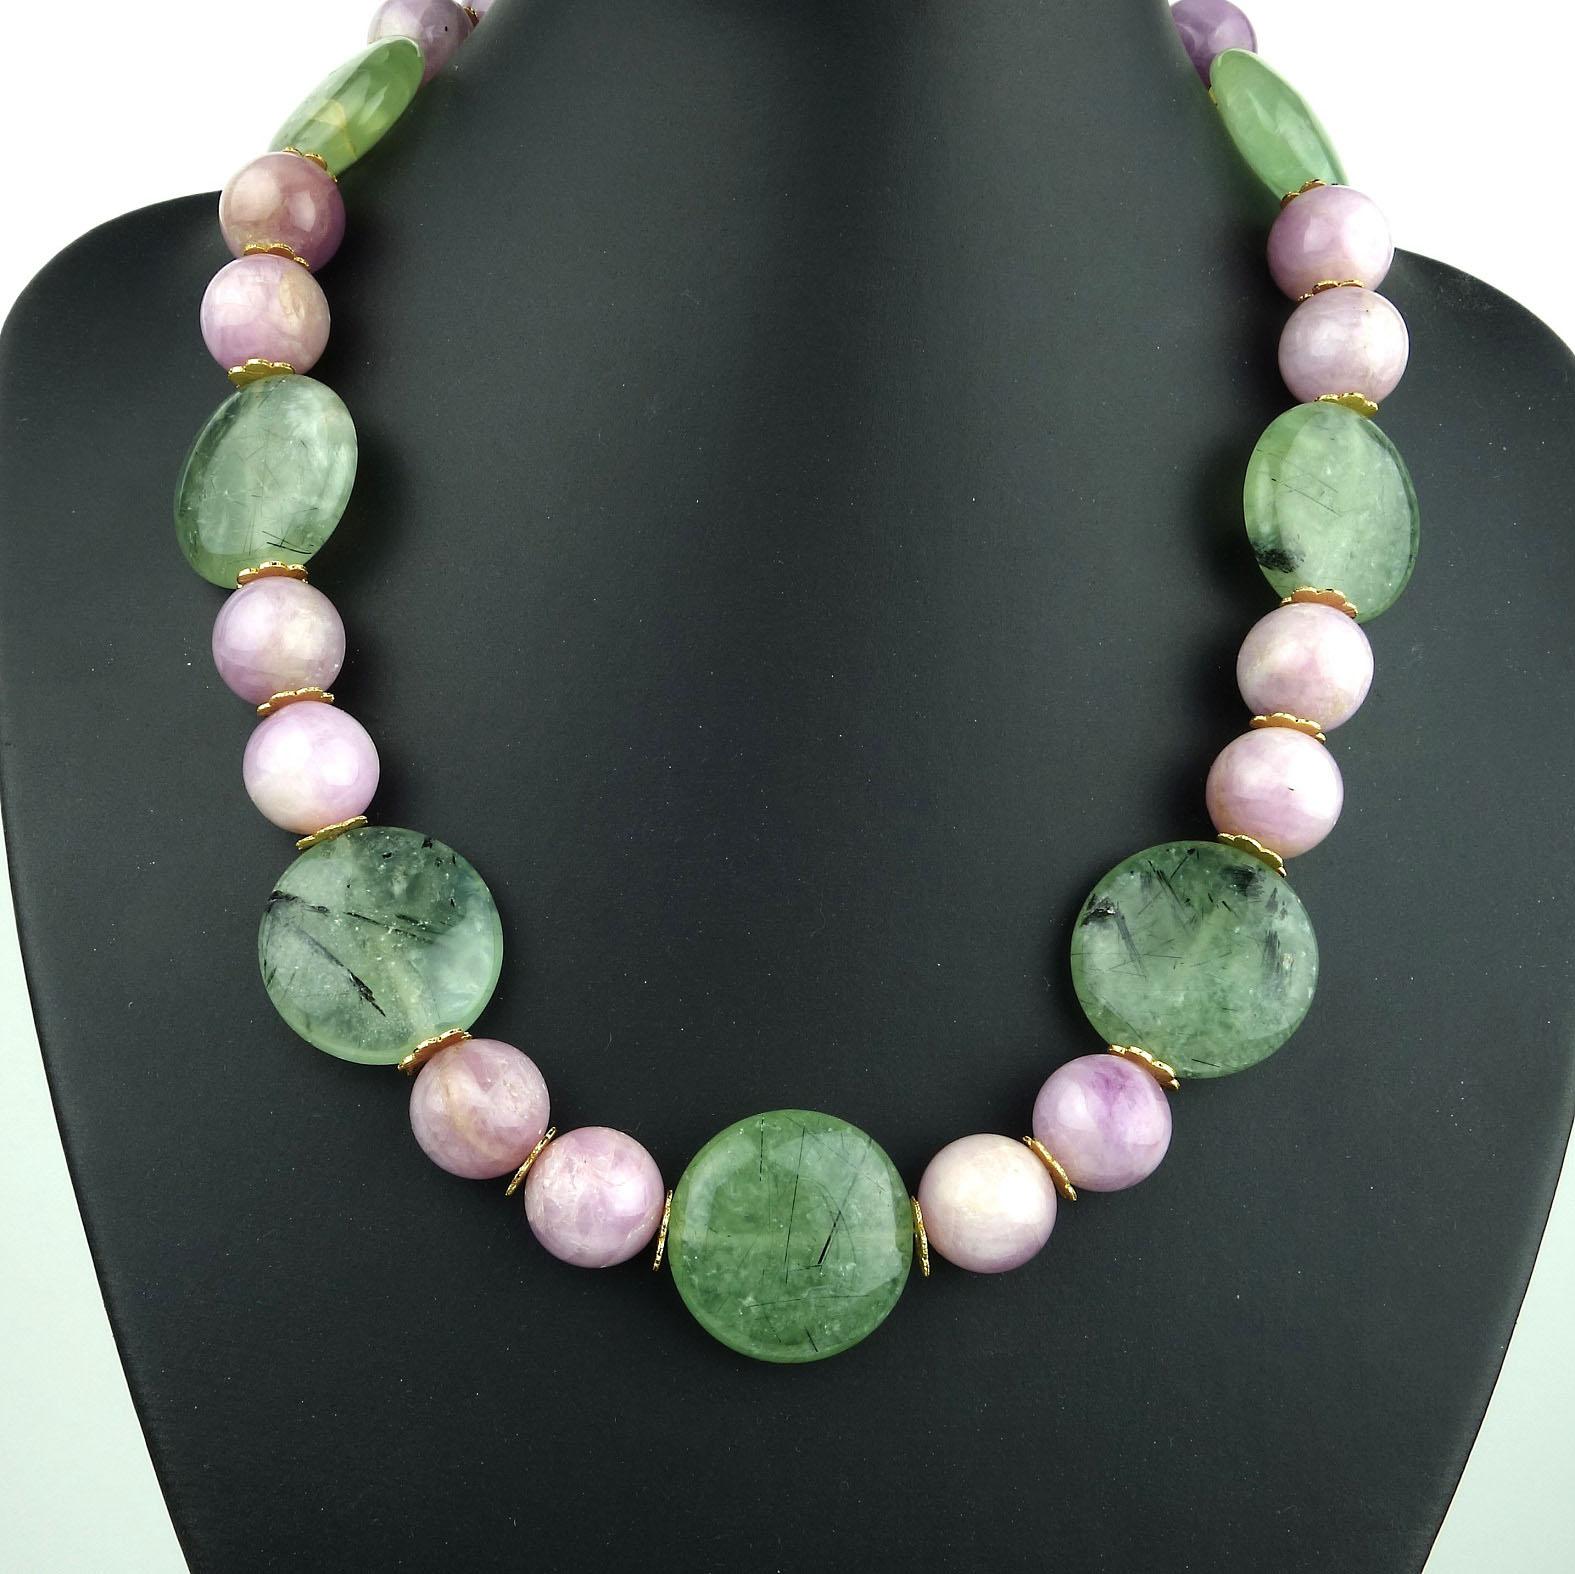 Glowing Summer necklace of Pink Kunzite 14 MM  beads and green Prehnite 25 MM discs. This extraordinary necklace is enhanced with gold tone fluted spacers and a vermeil hook closure.  The beautiful Brazilian Prehnite comes from one of our favorite